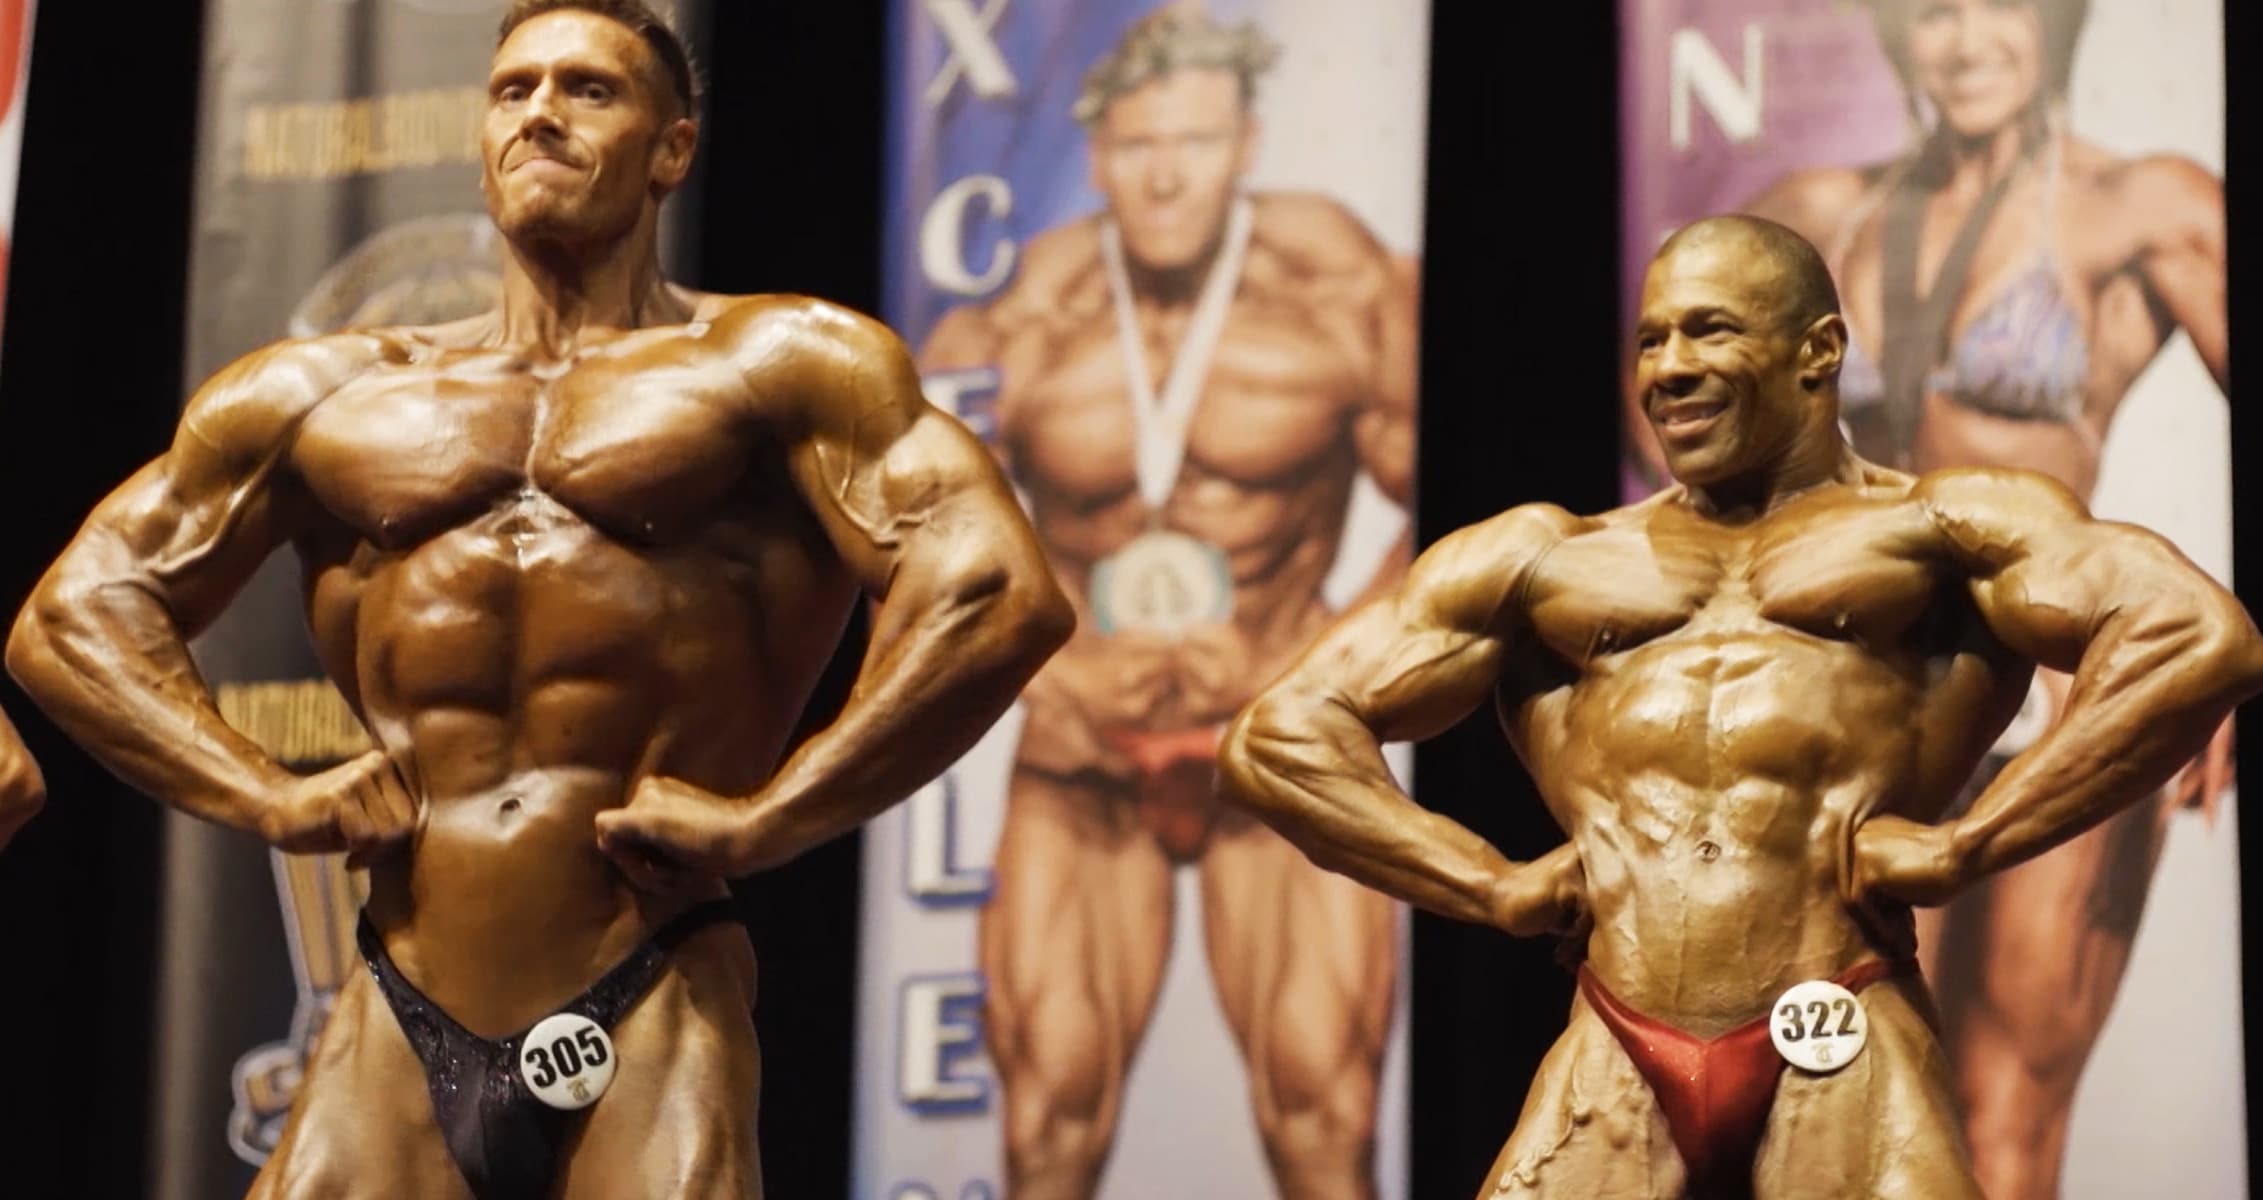 2021 Mr. Olympia List of Qualified Athletes in Every Division